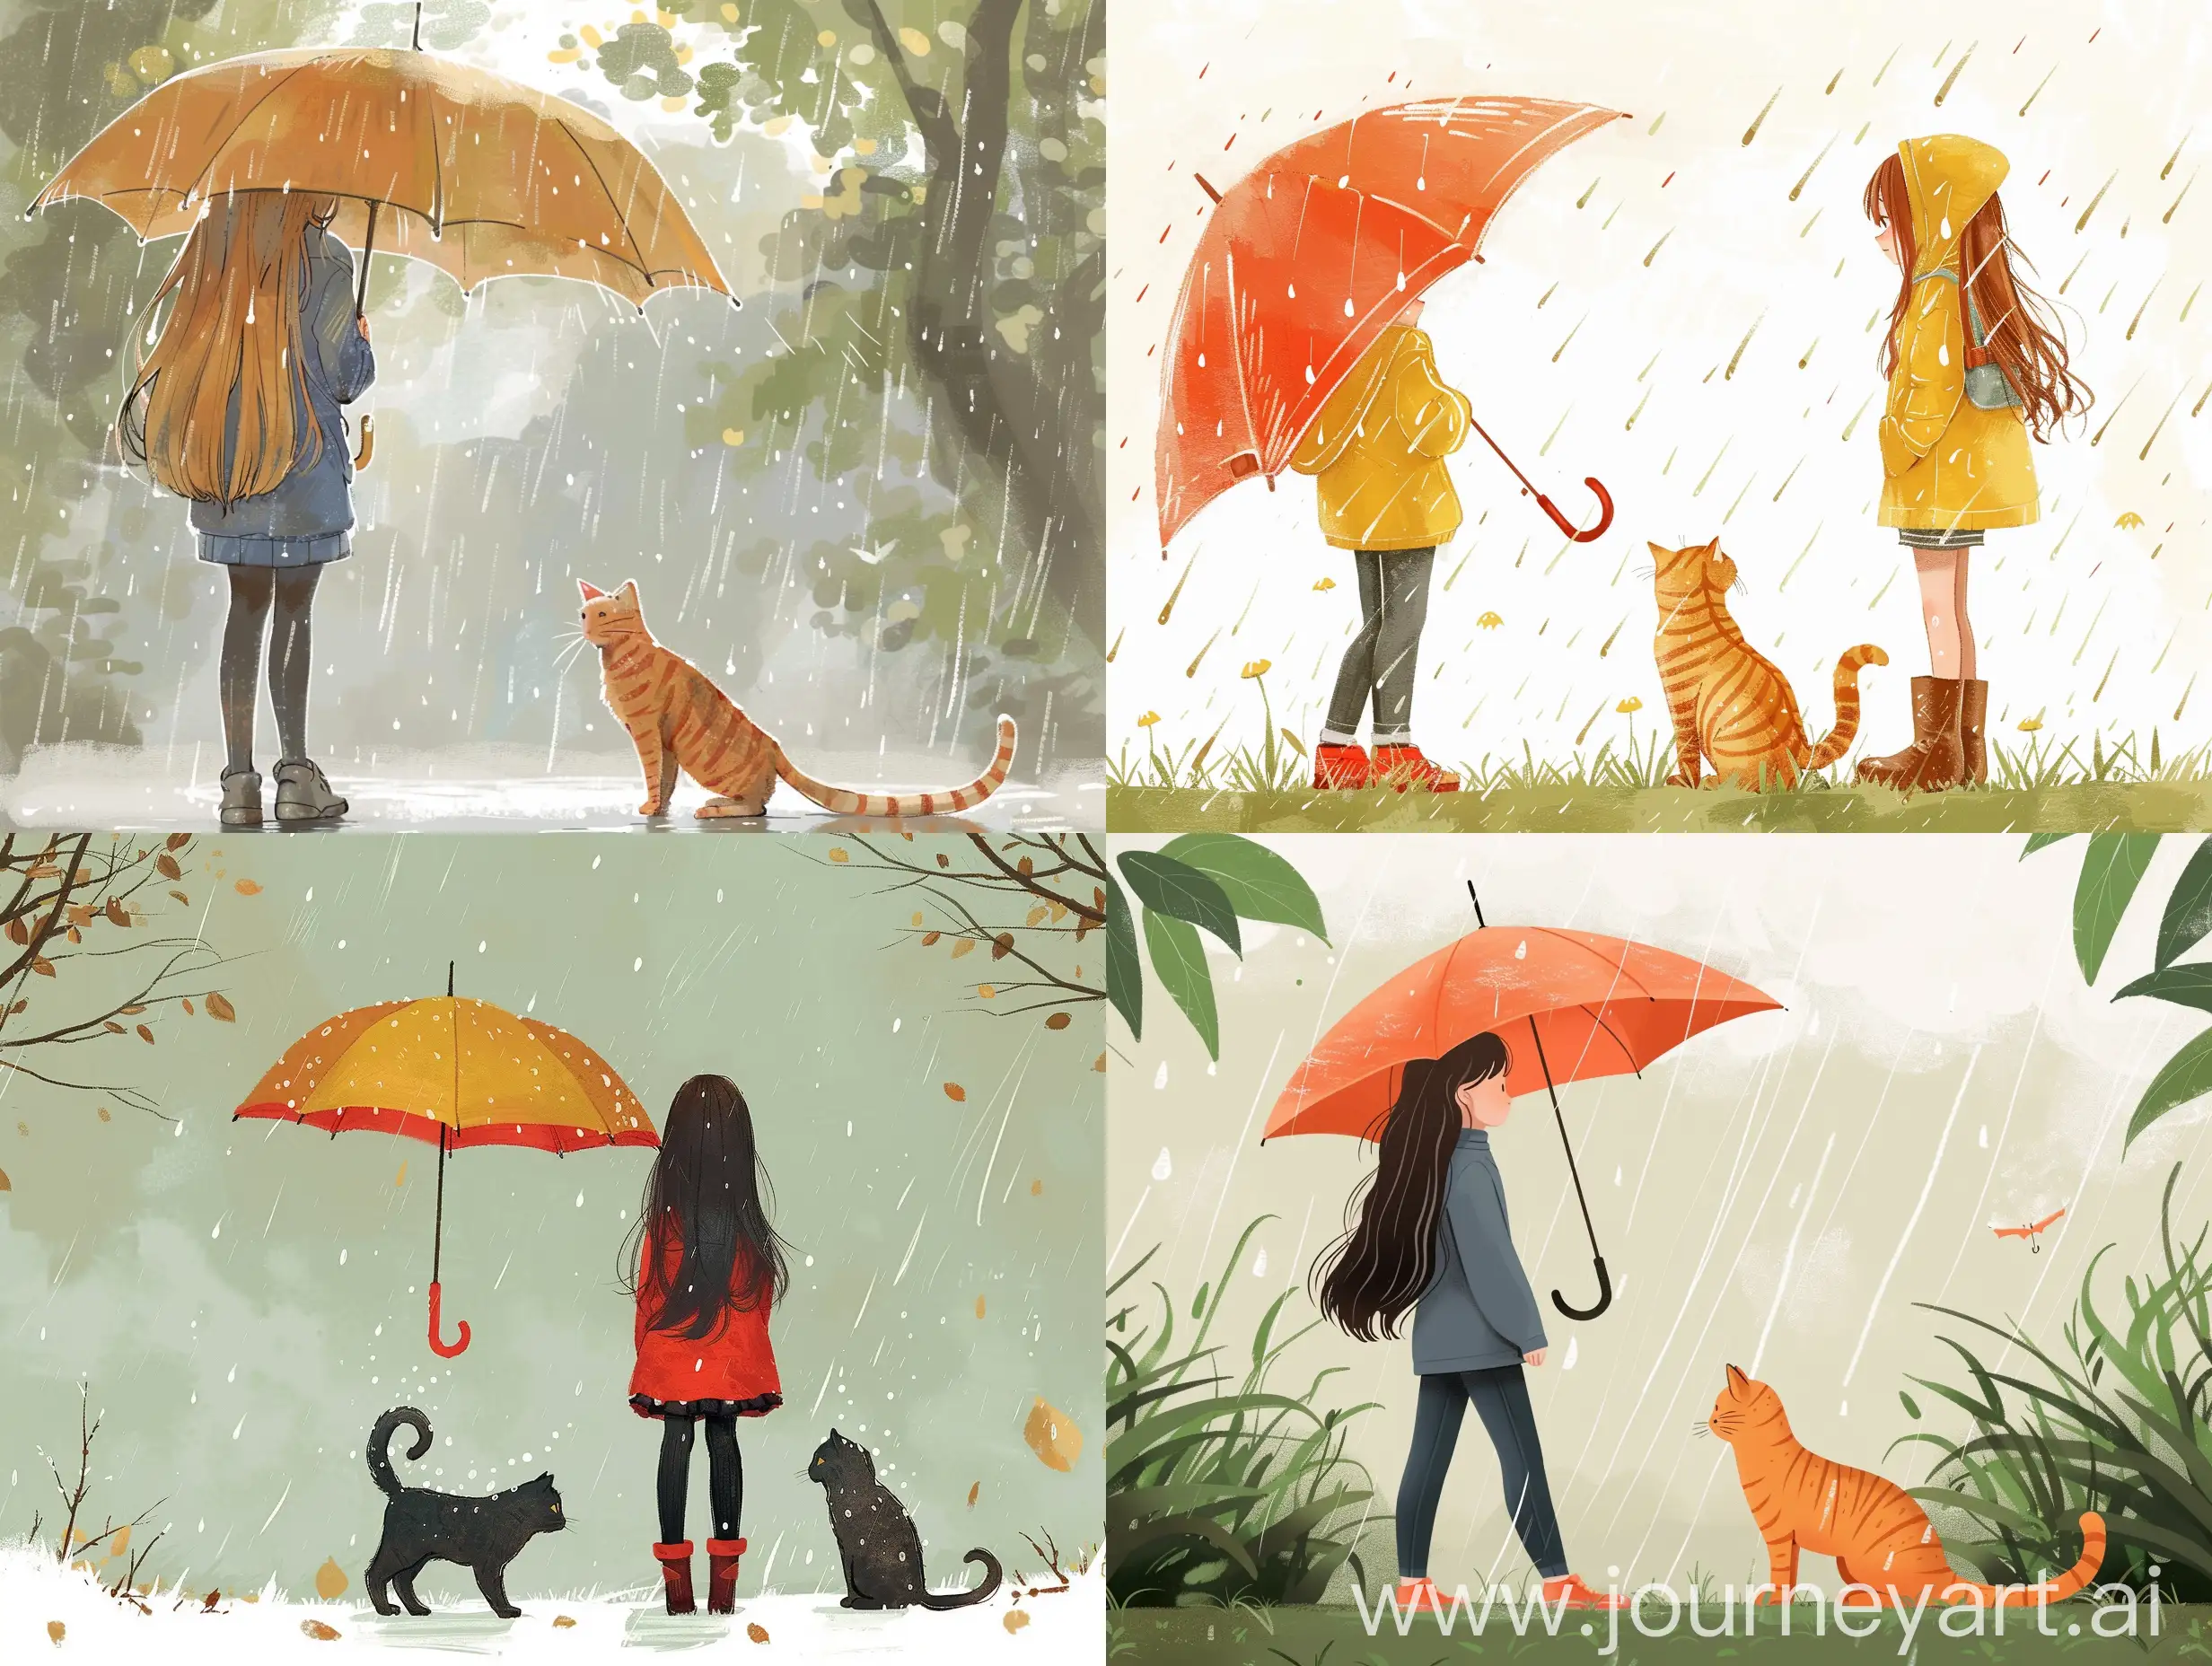 Detailed-Masterpiece-Illustration-of-a-Girl-Standing-with-Cat-under-Umbrella-in-the-Rain